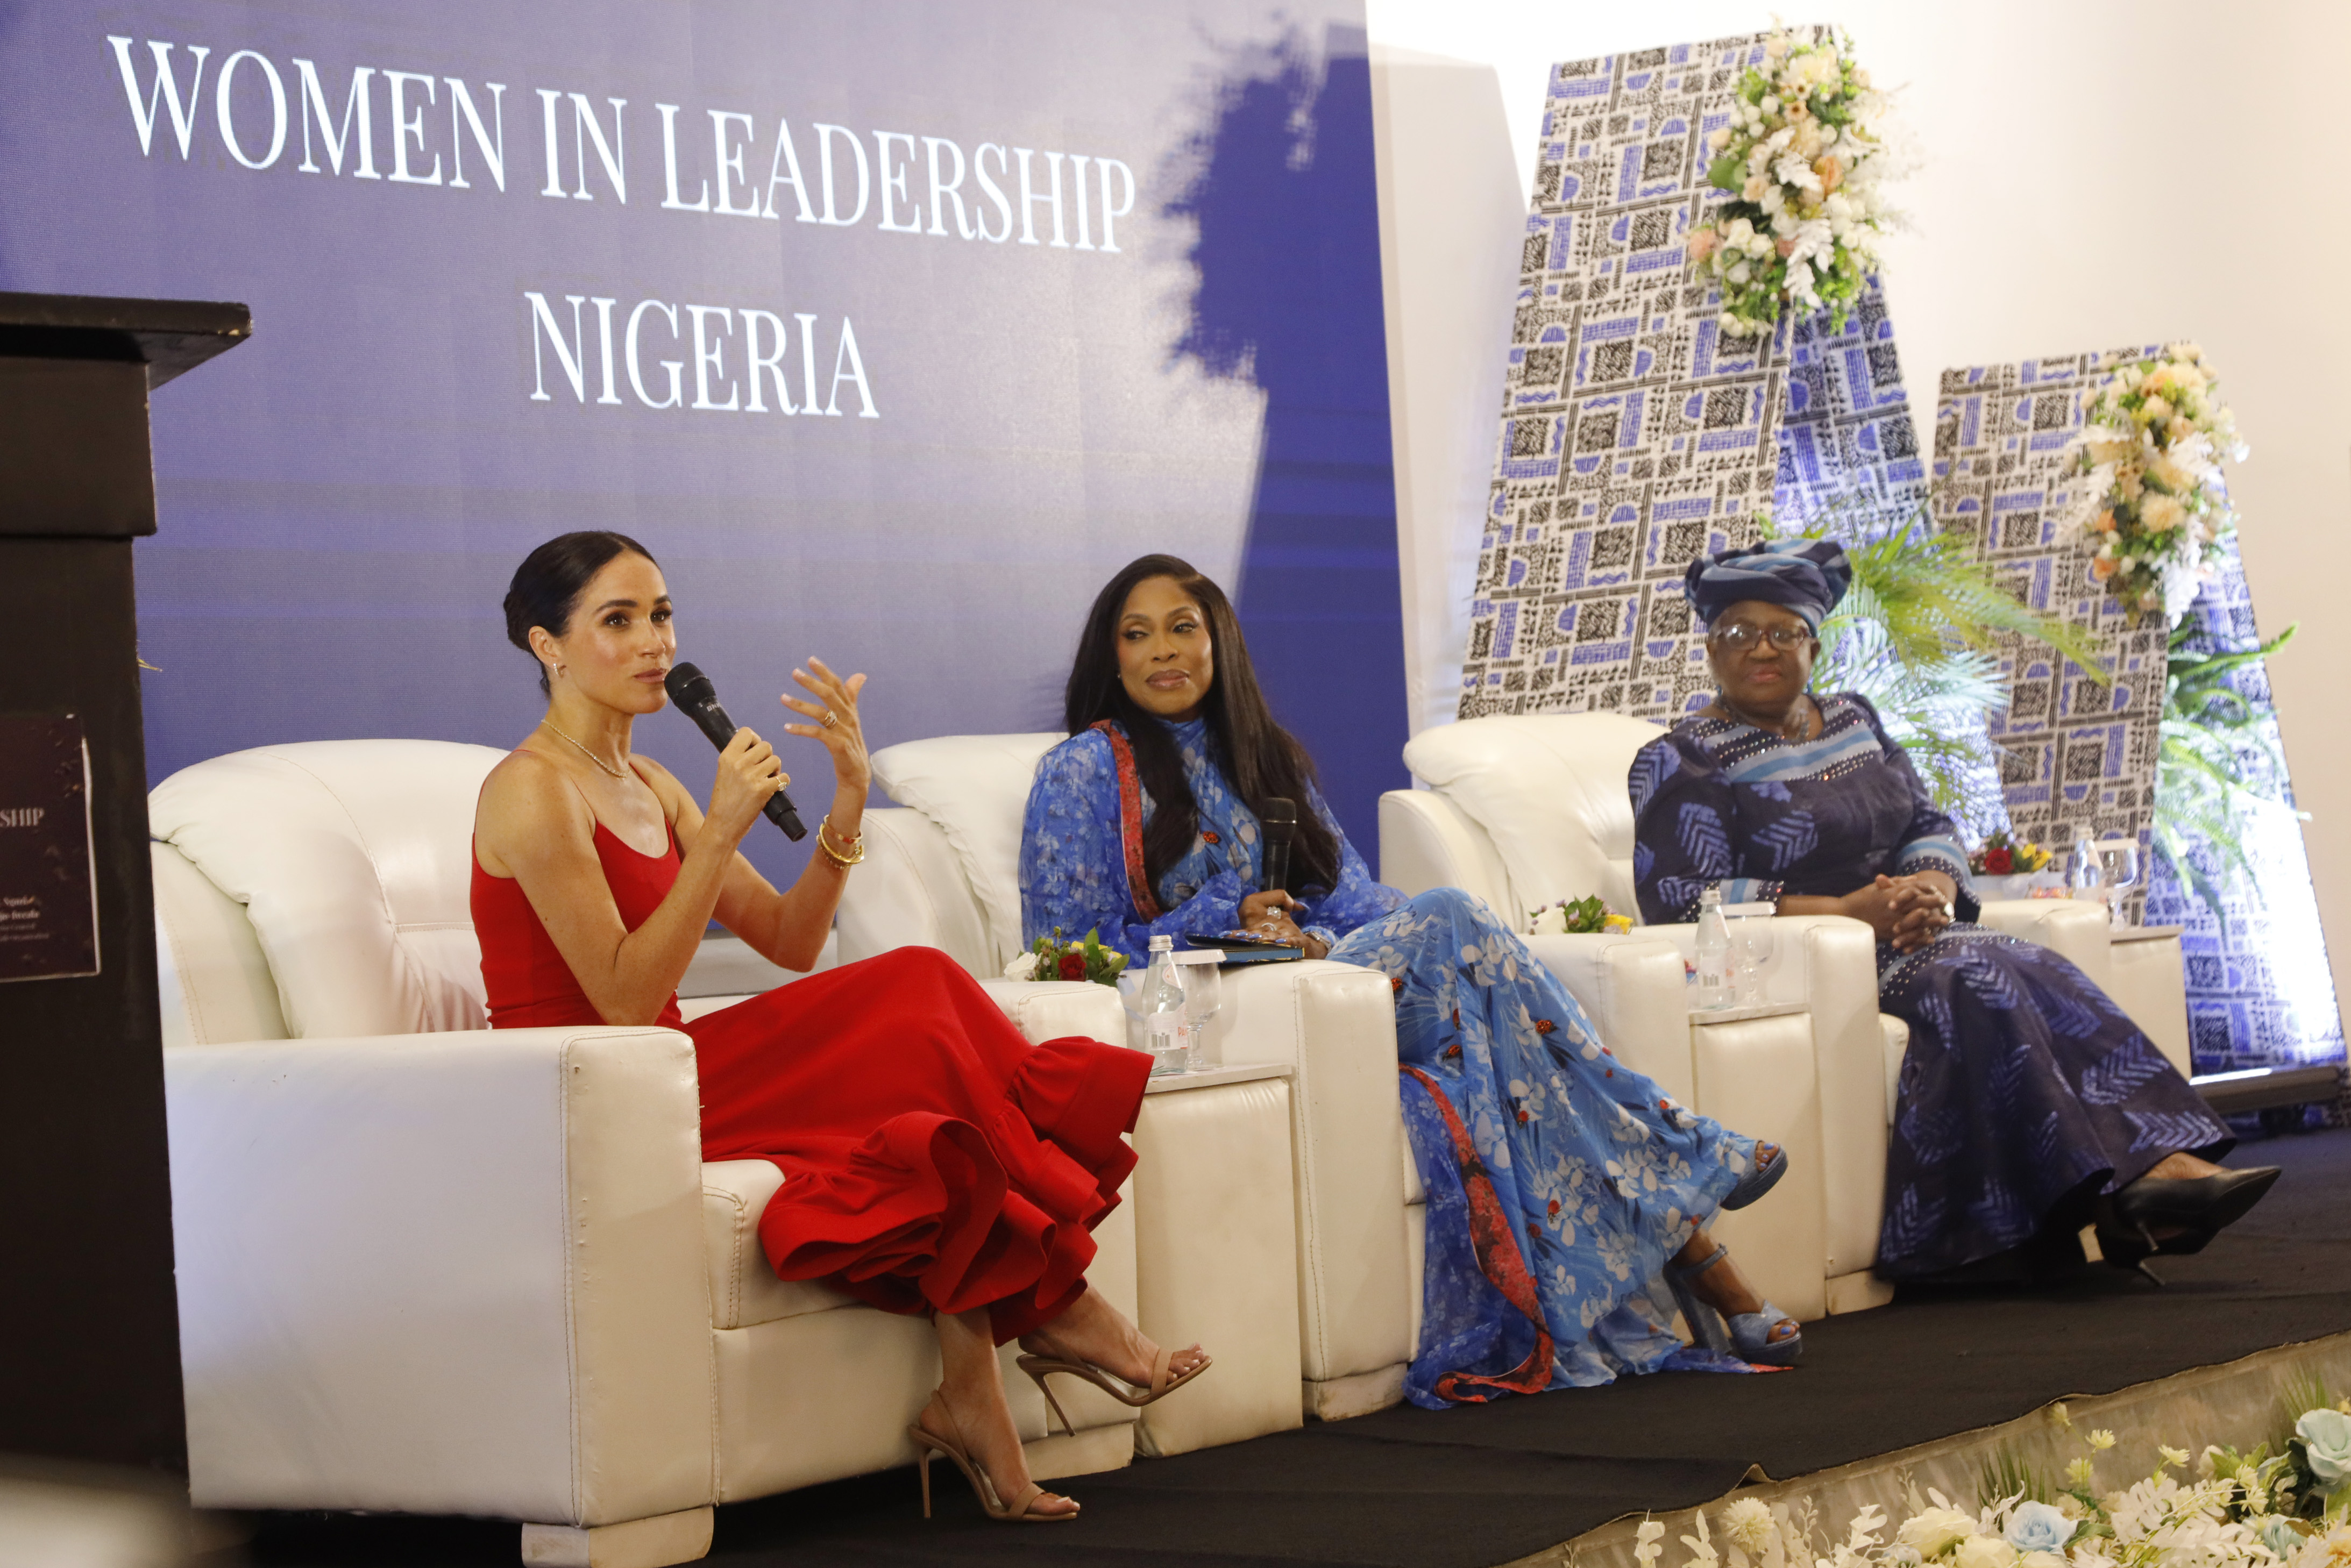 Meghan, Duchess of Sussex at the Women in Leadership event with Ngozi Okonjo-Iweala in Abuja, Nigeria in 2024 | Source: Getty Images